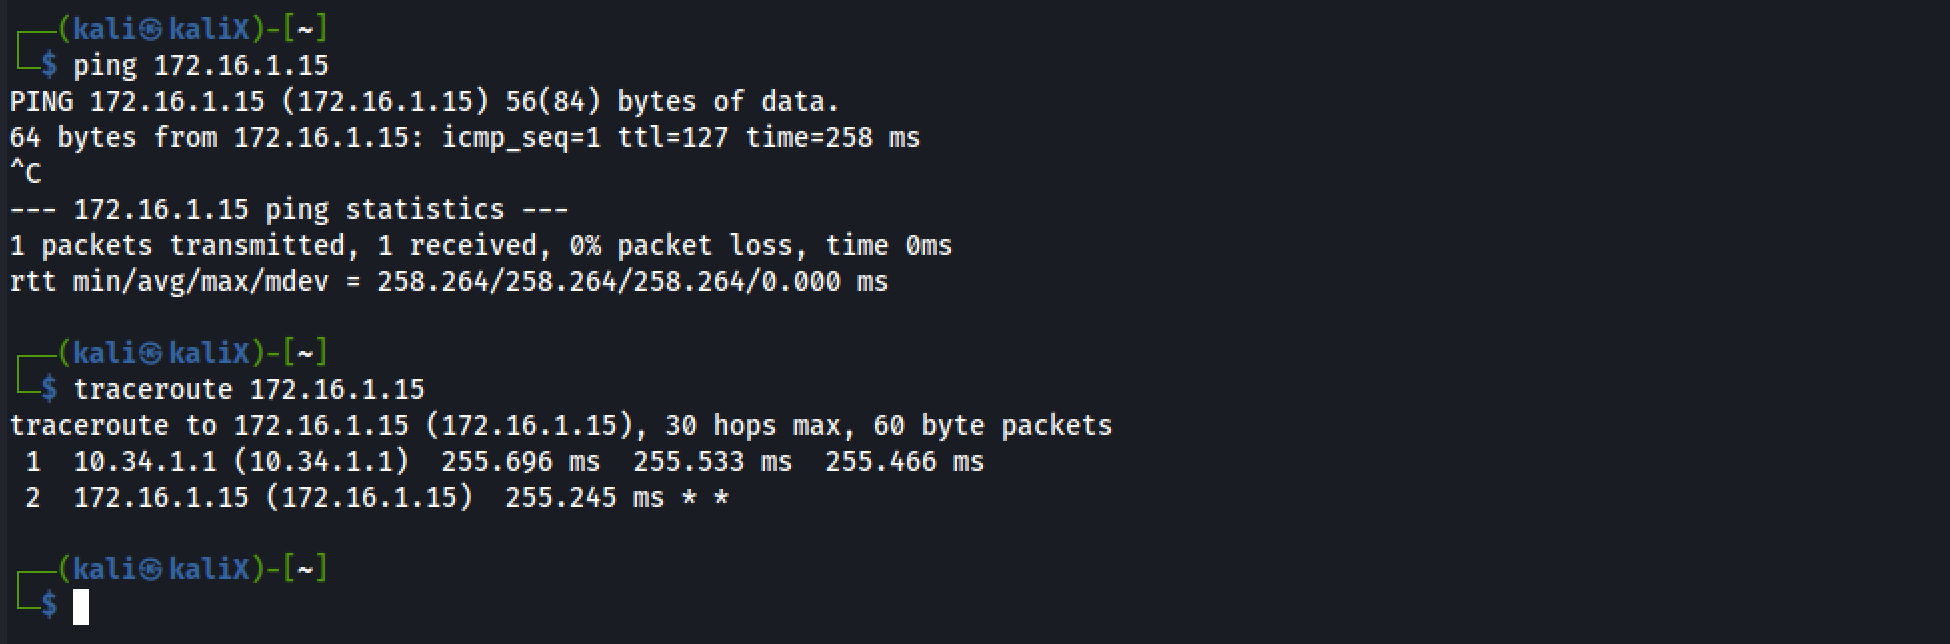 ping, traceroute